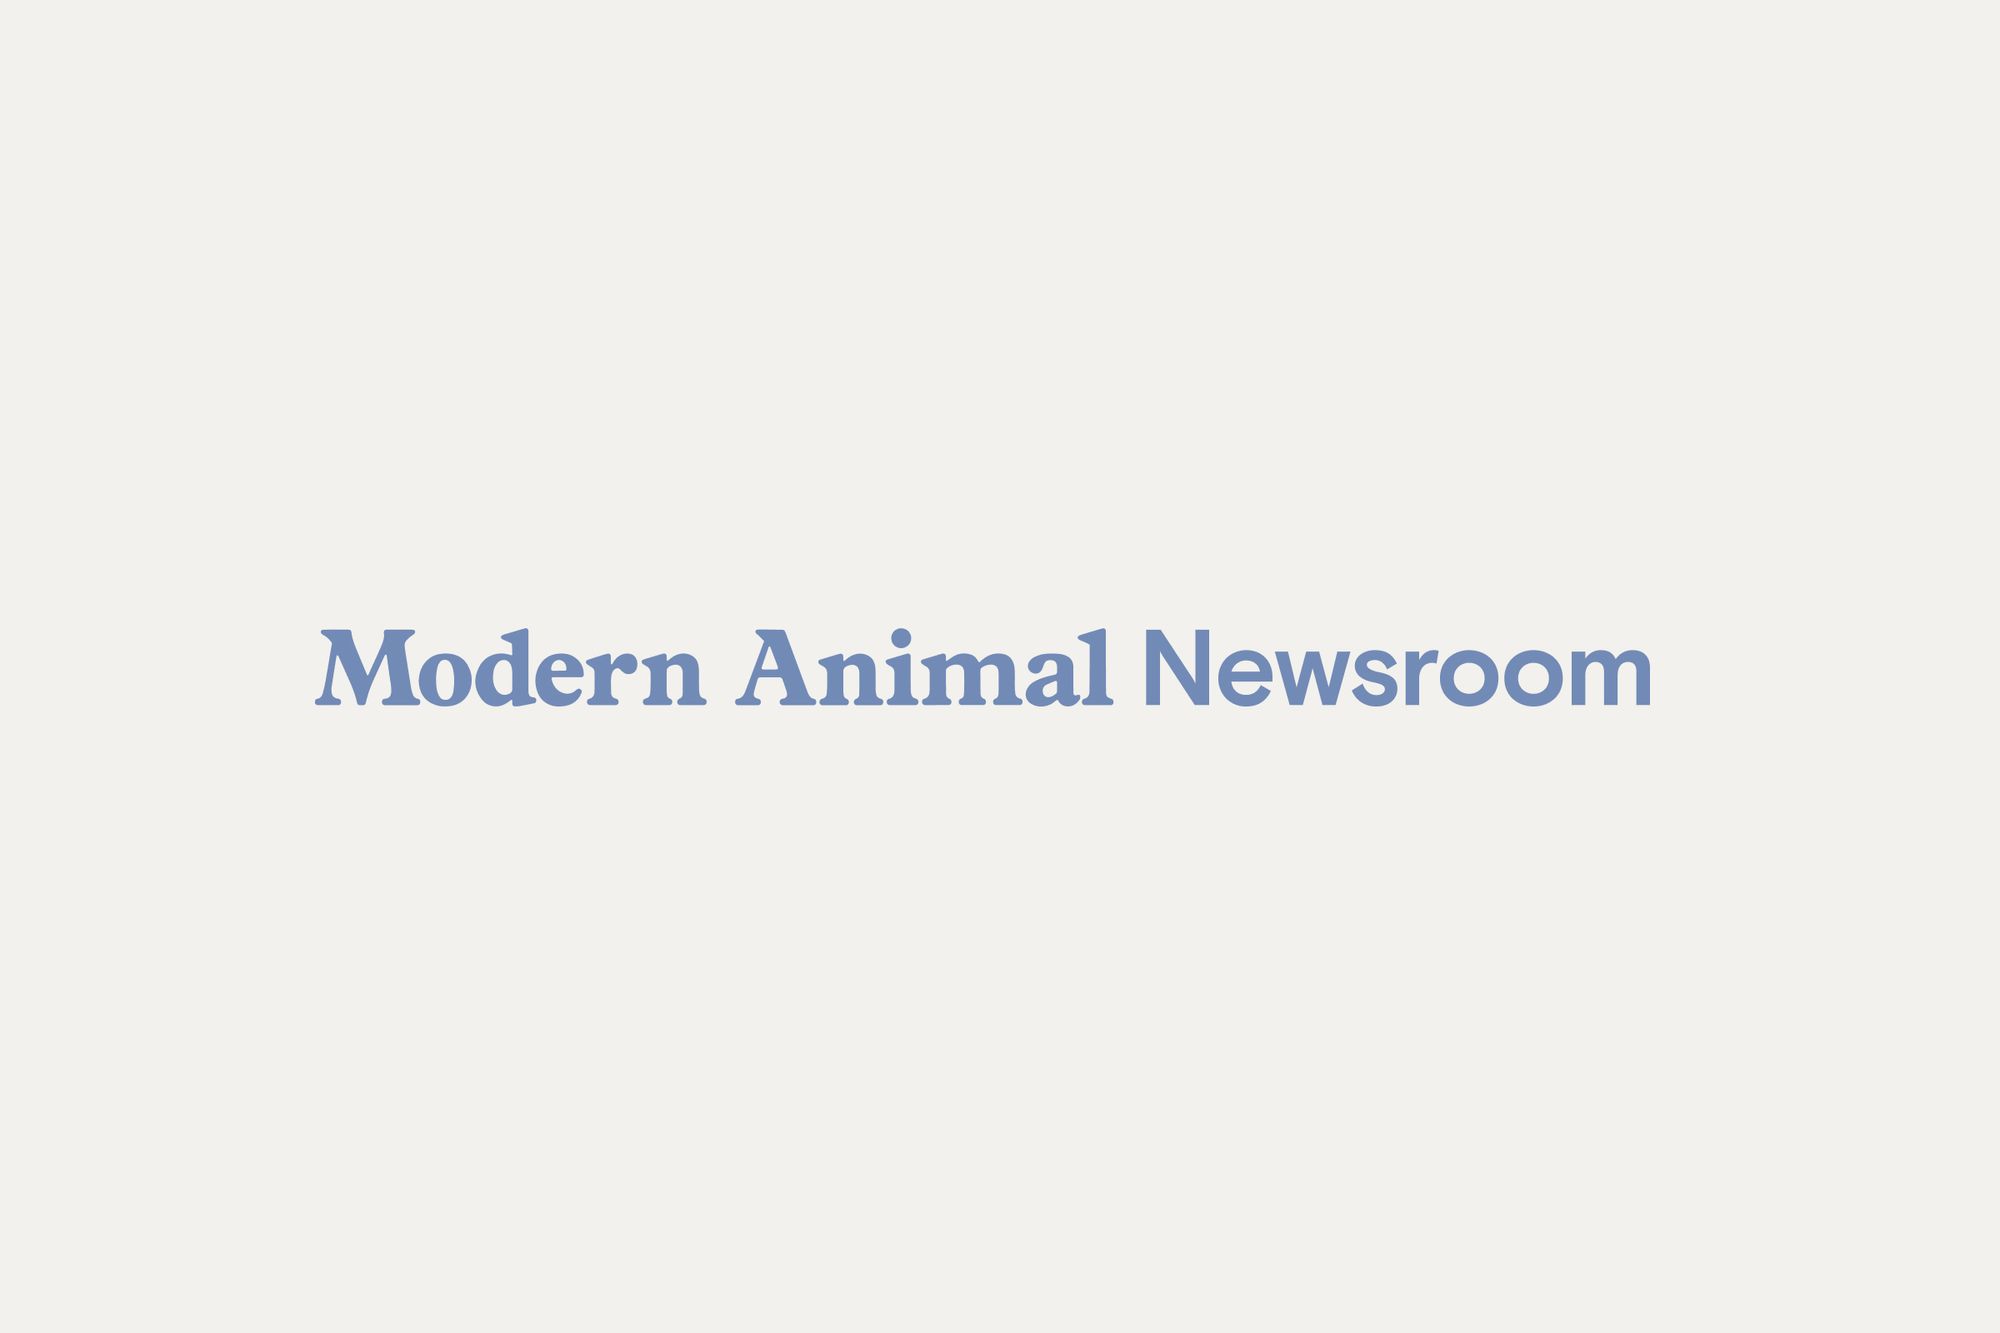 Modern Animal Accelerates Plans for National Expansion; Appoints Chief Medical Officer and Chief Product Officer